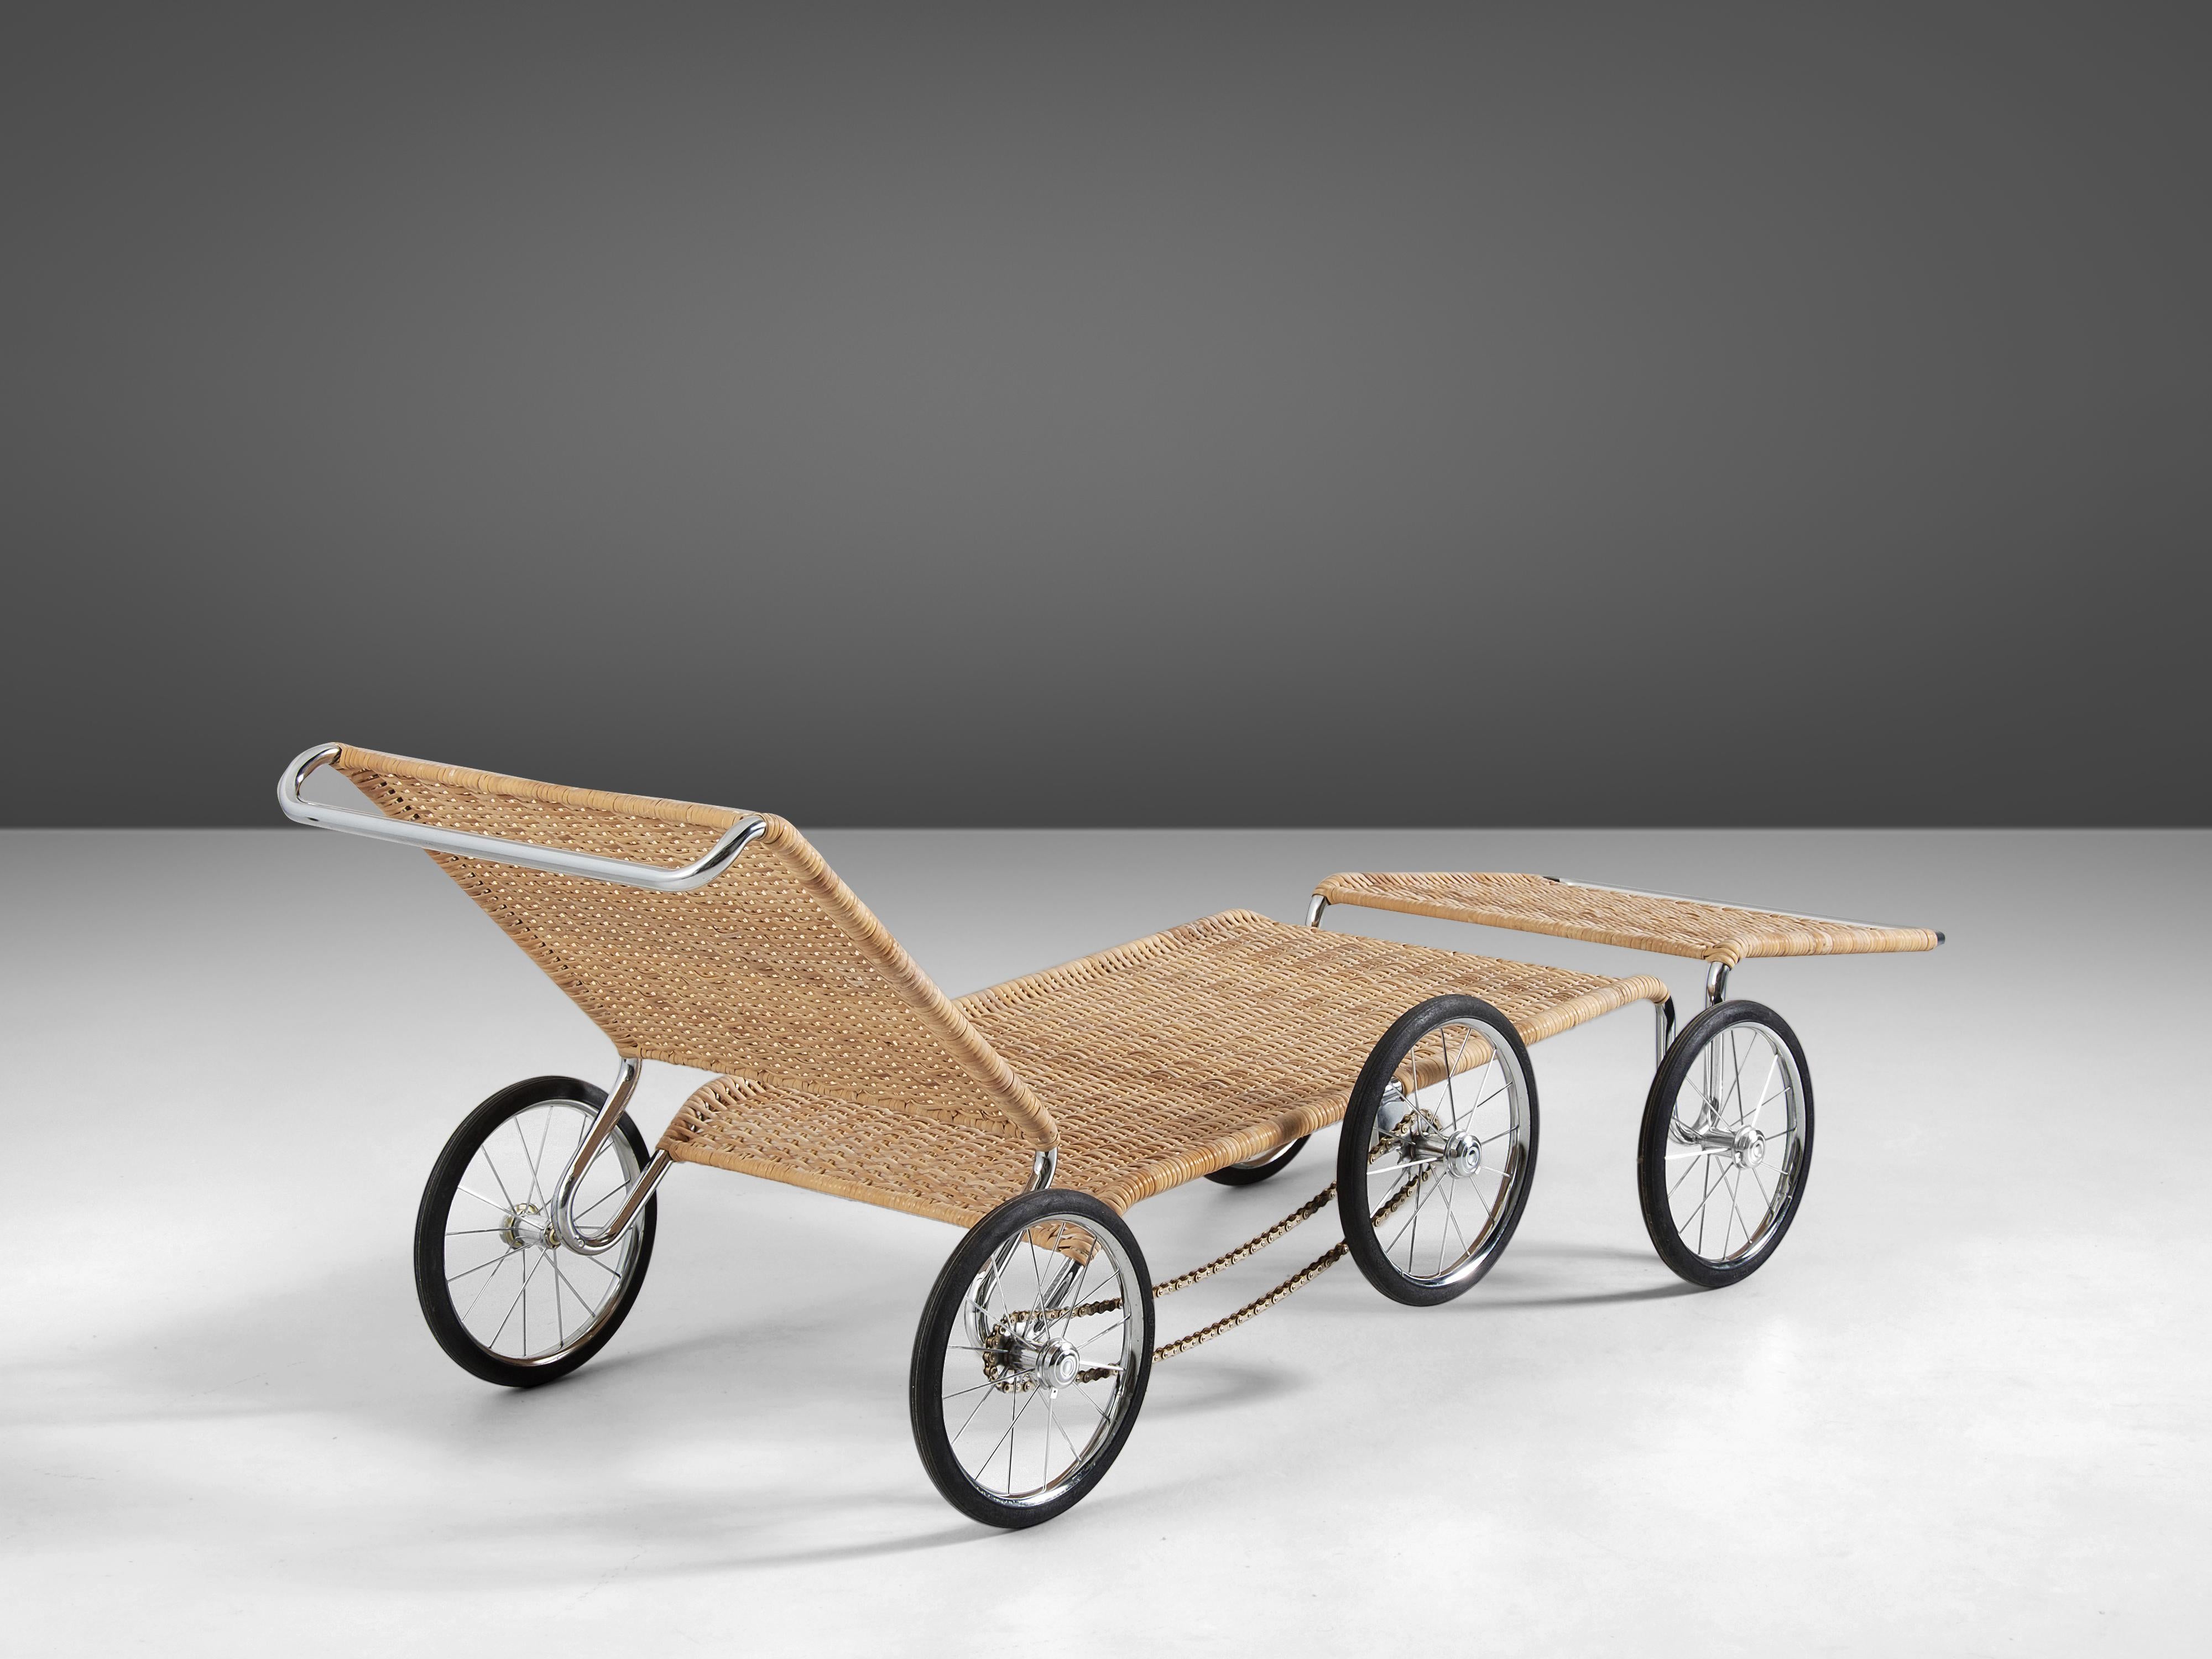 Steel Marcel Breuer for Tecta 'The Mobile Manifesto' Chaise Longue in Cane Wicker  For Sale